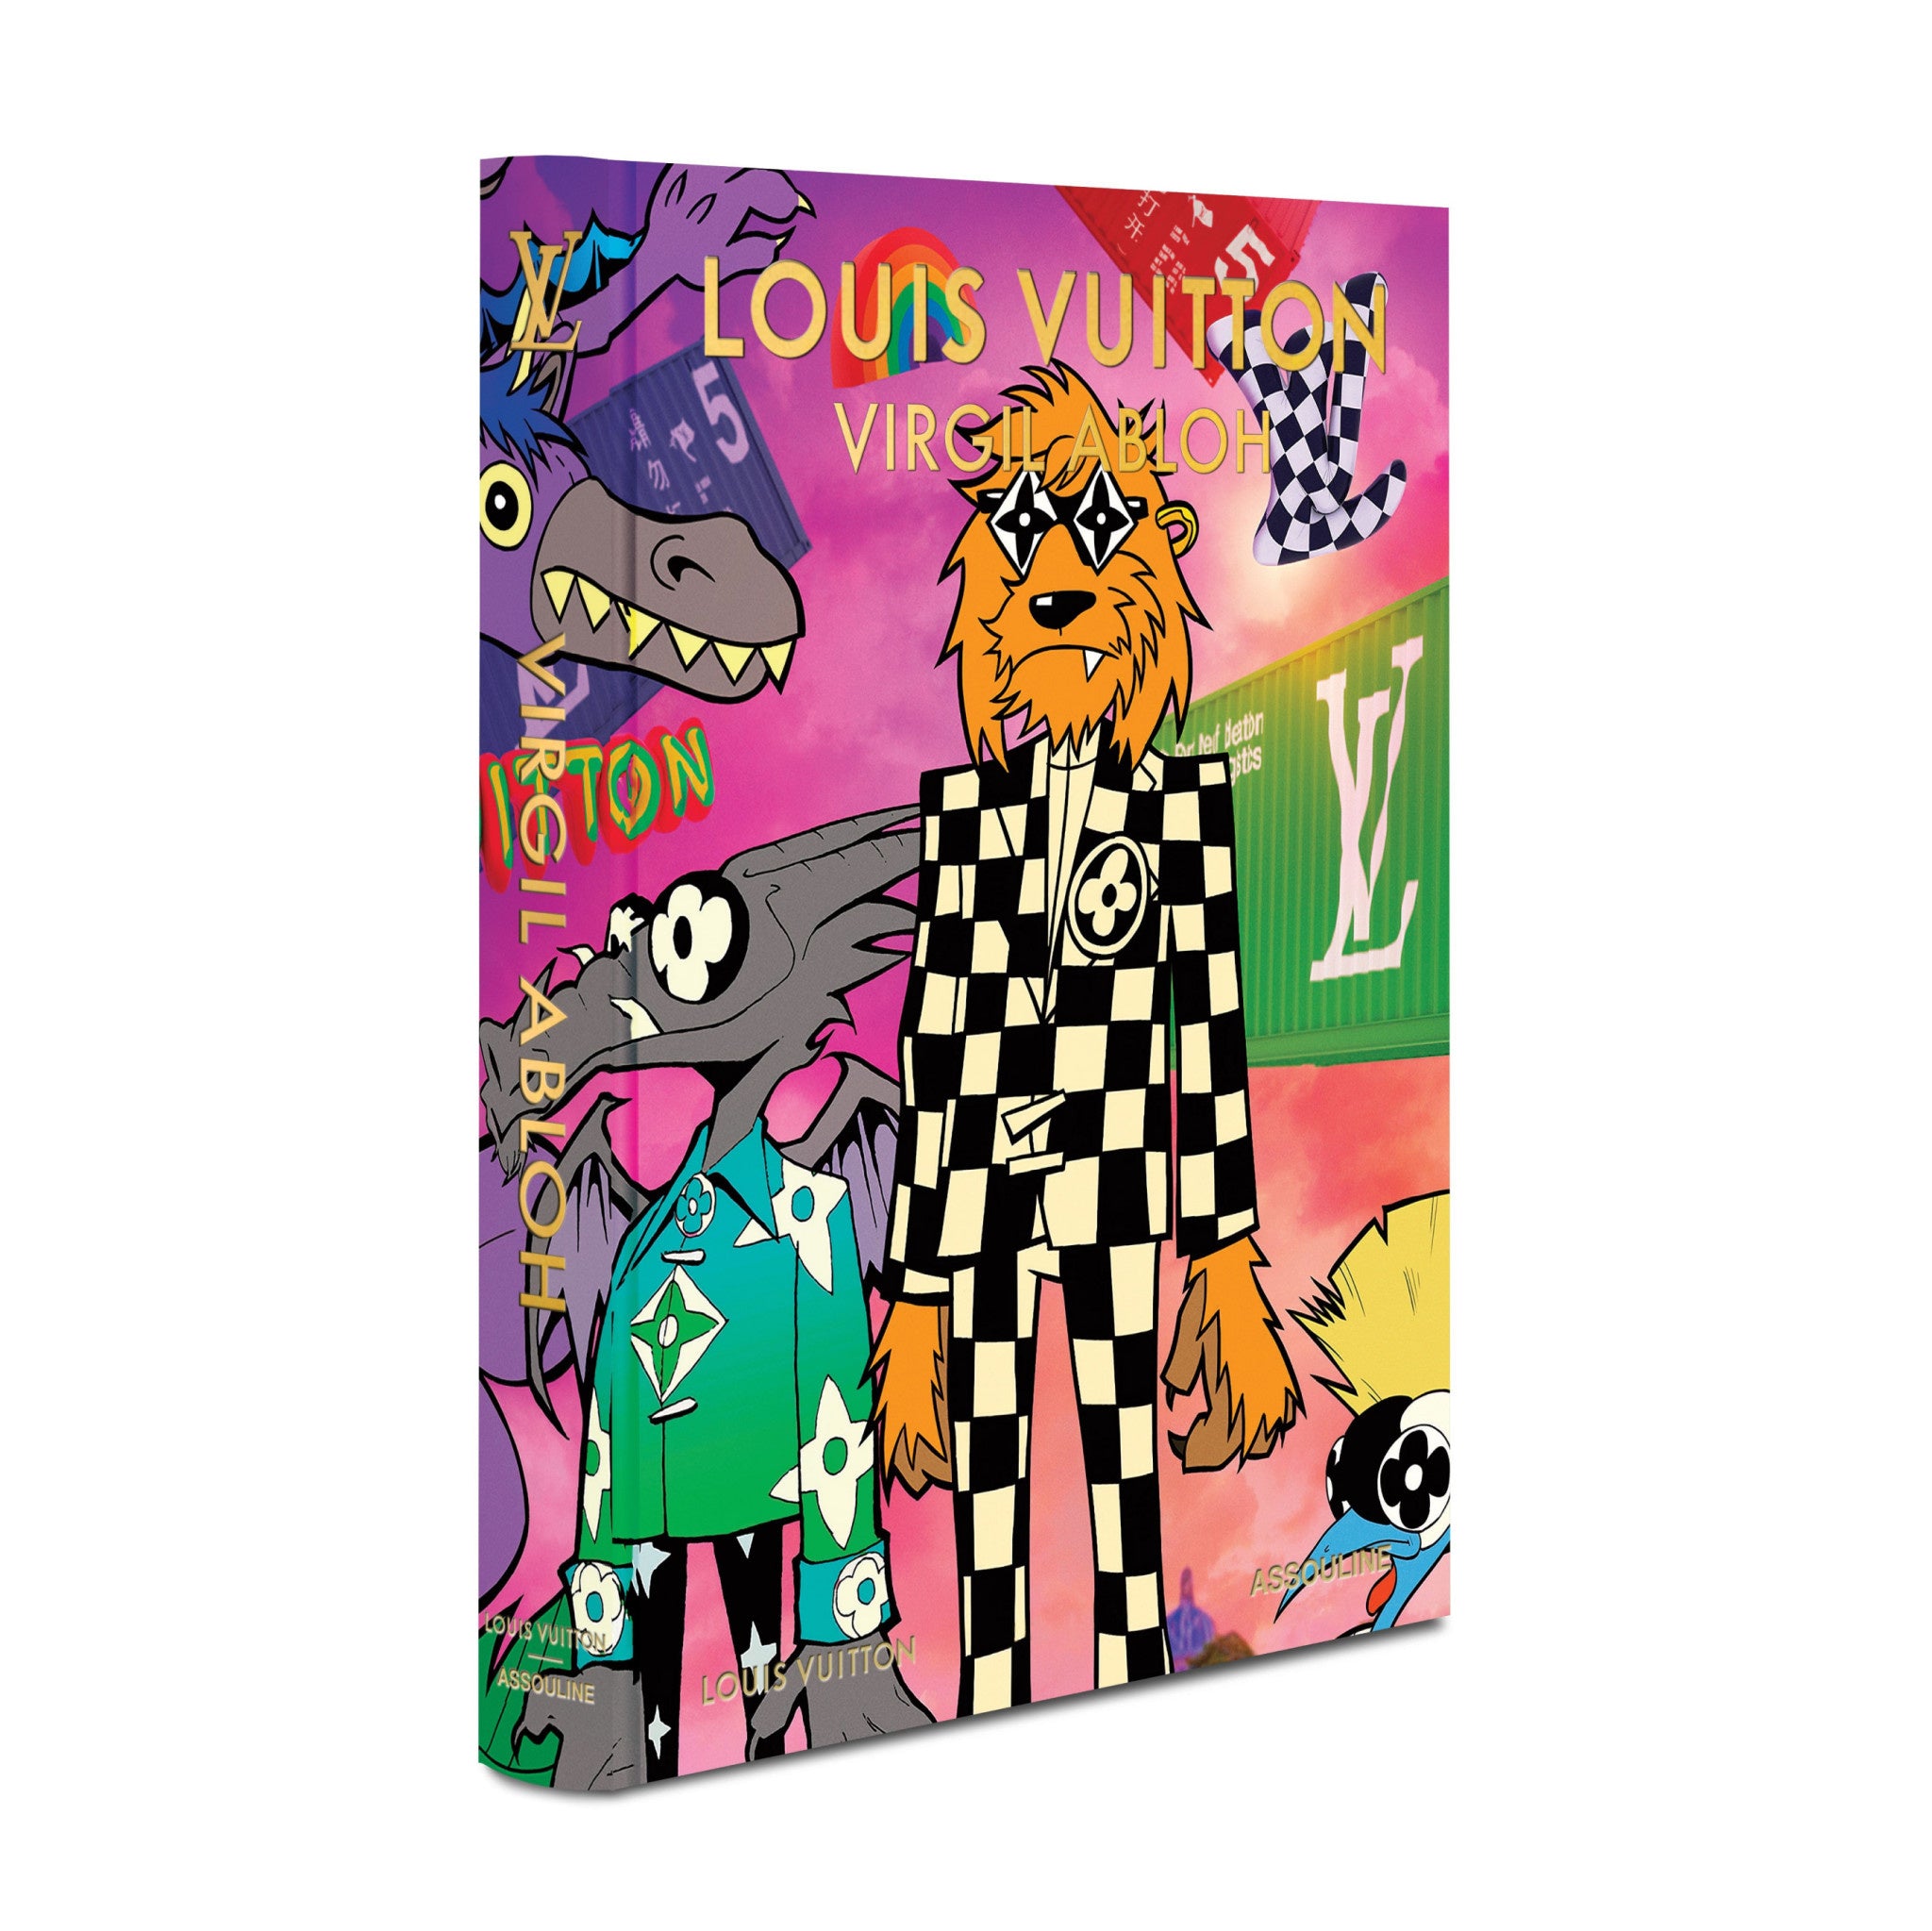 NEW! Virgil Abloh Limited Edition LV And Friends Louis Vuitton 1 Sticker  Sheet